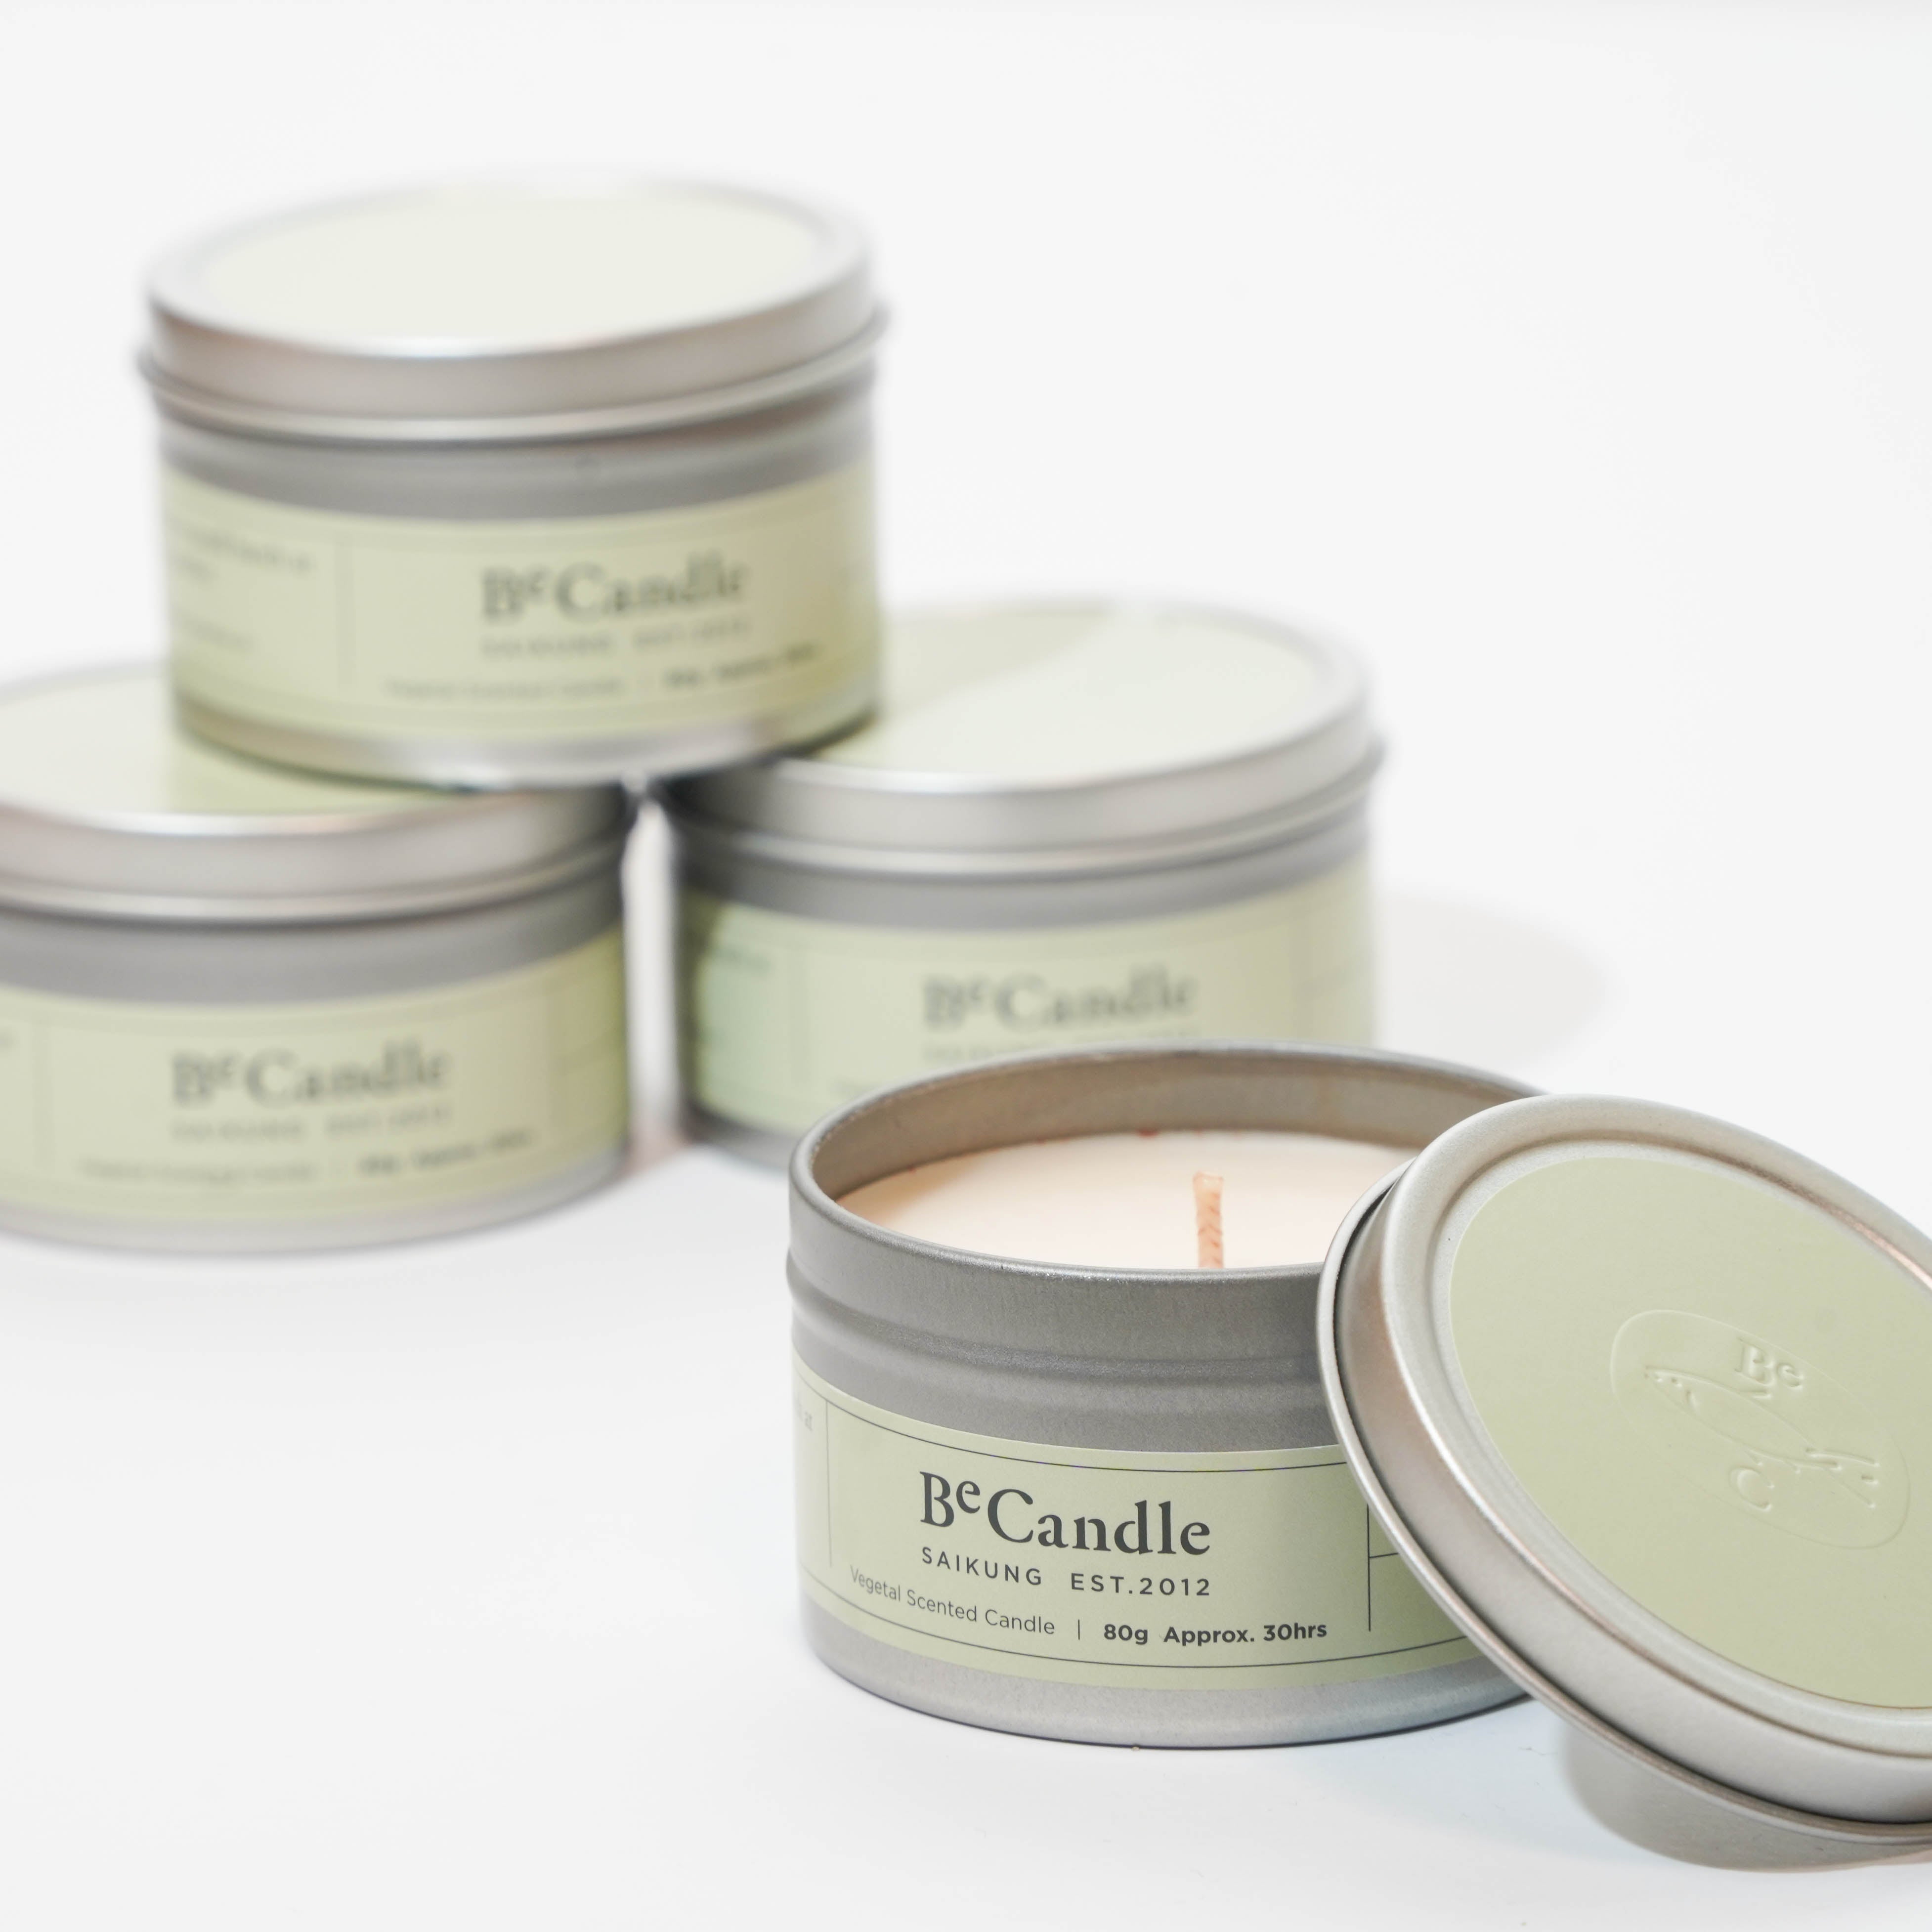 BeCandle 39. Black Fig - Travel size (80g / approx 30hrs)